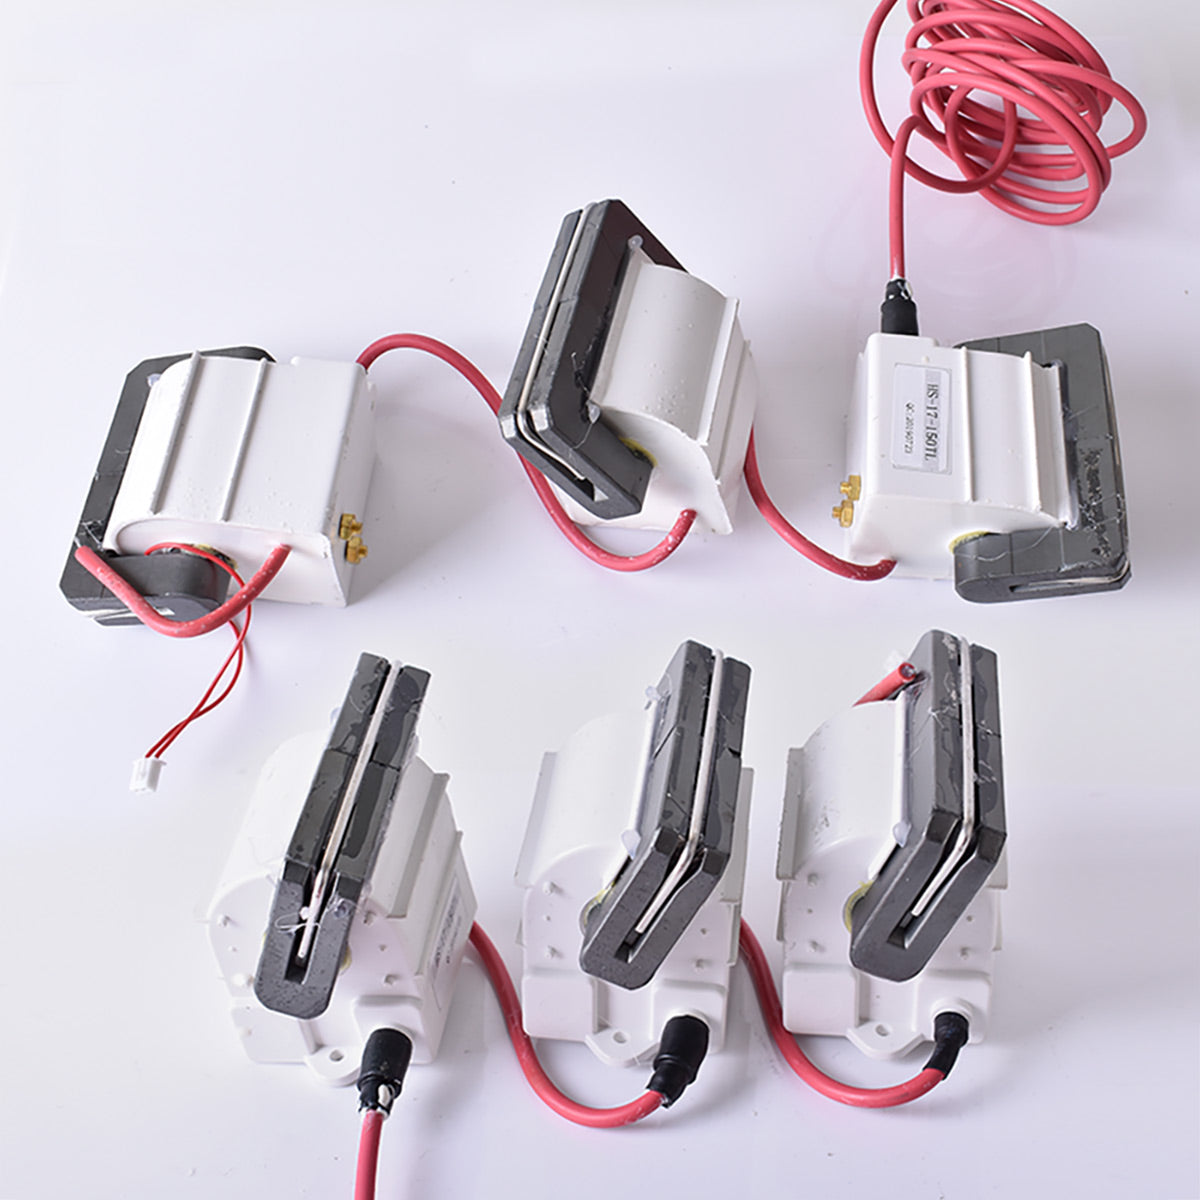 3Pcs/Lot Laser High Voltage Transformer Flyback Lgnition Coil For 130W 150W CO2 Laser Power Supply Parts